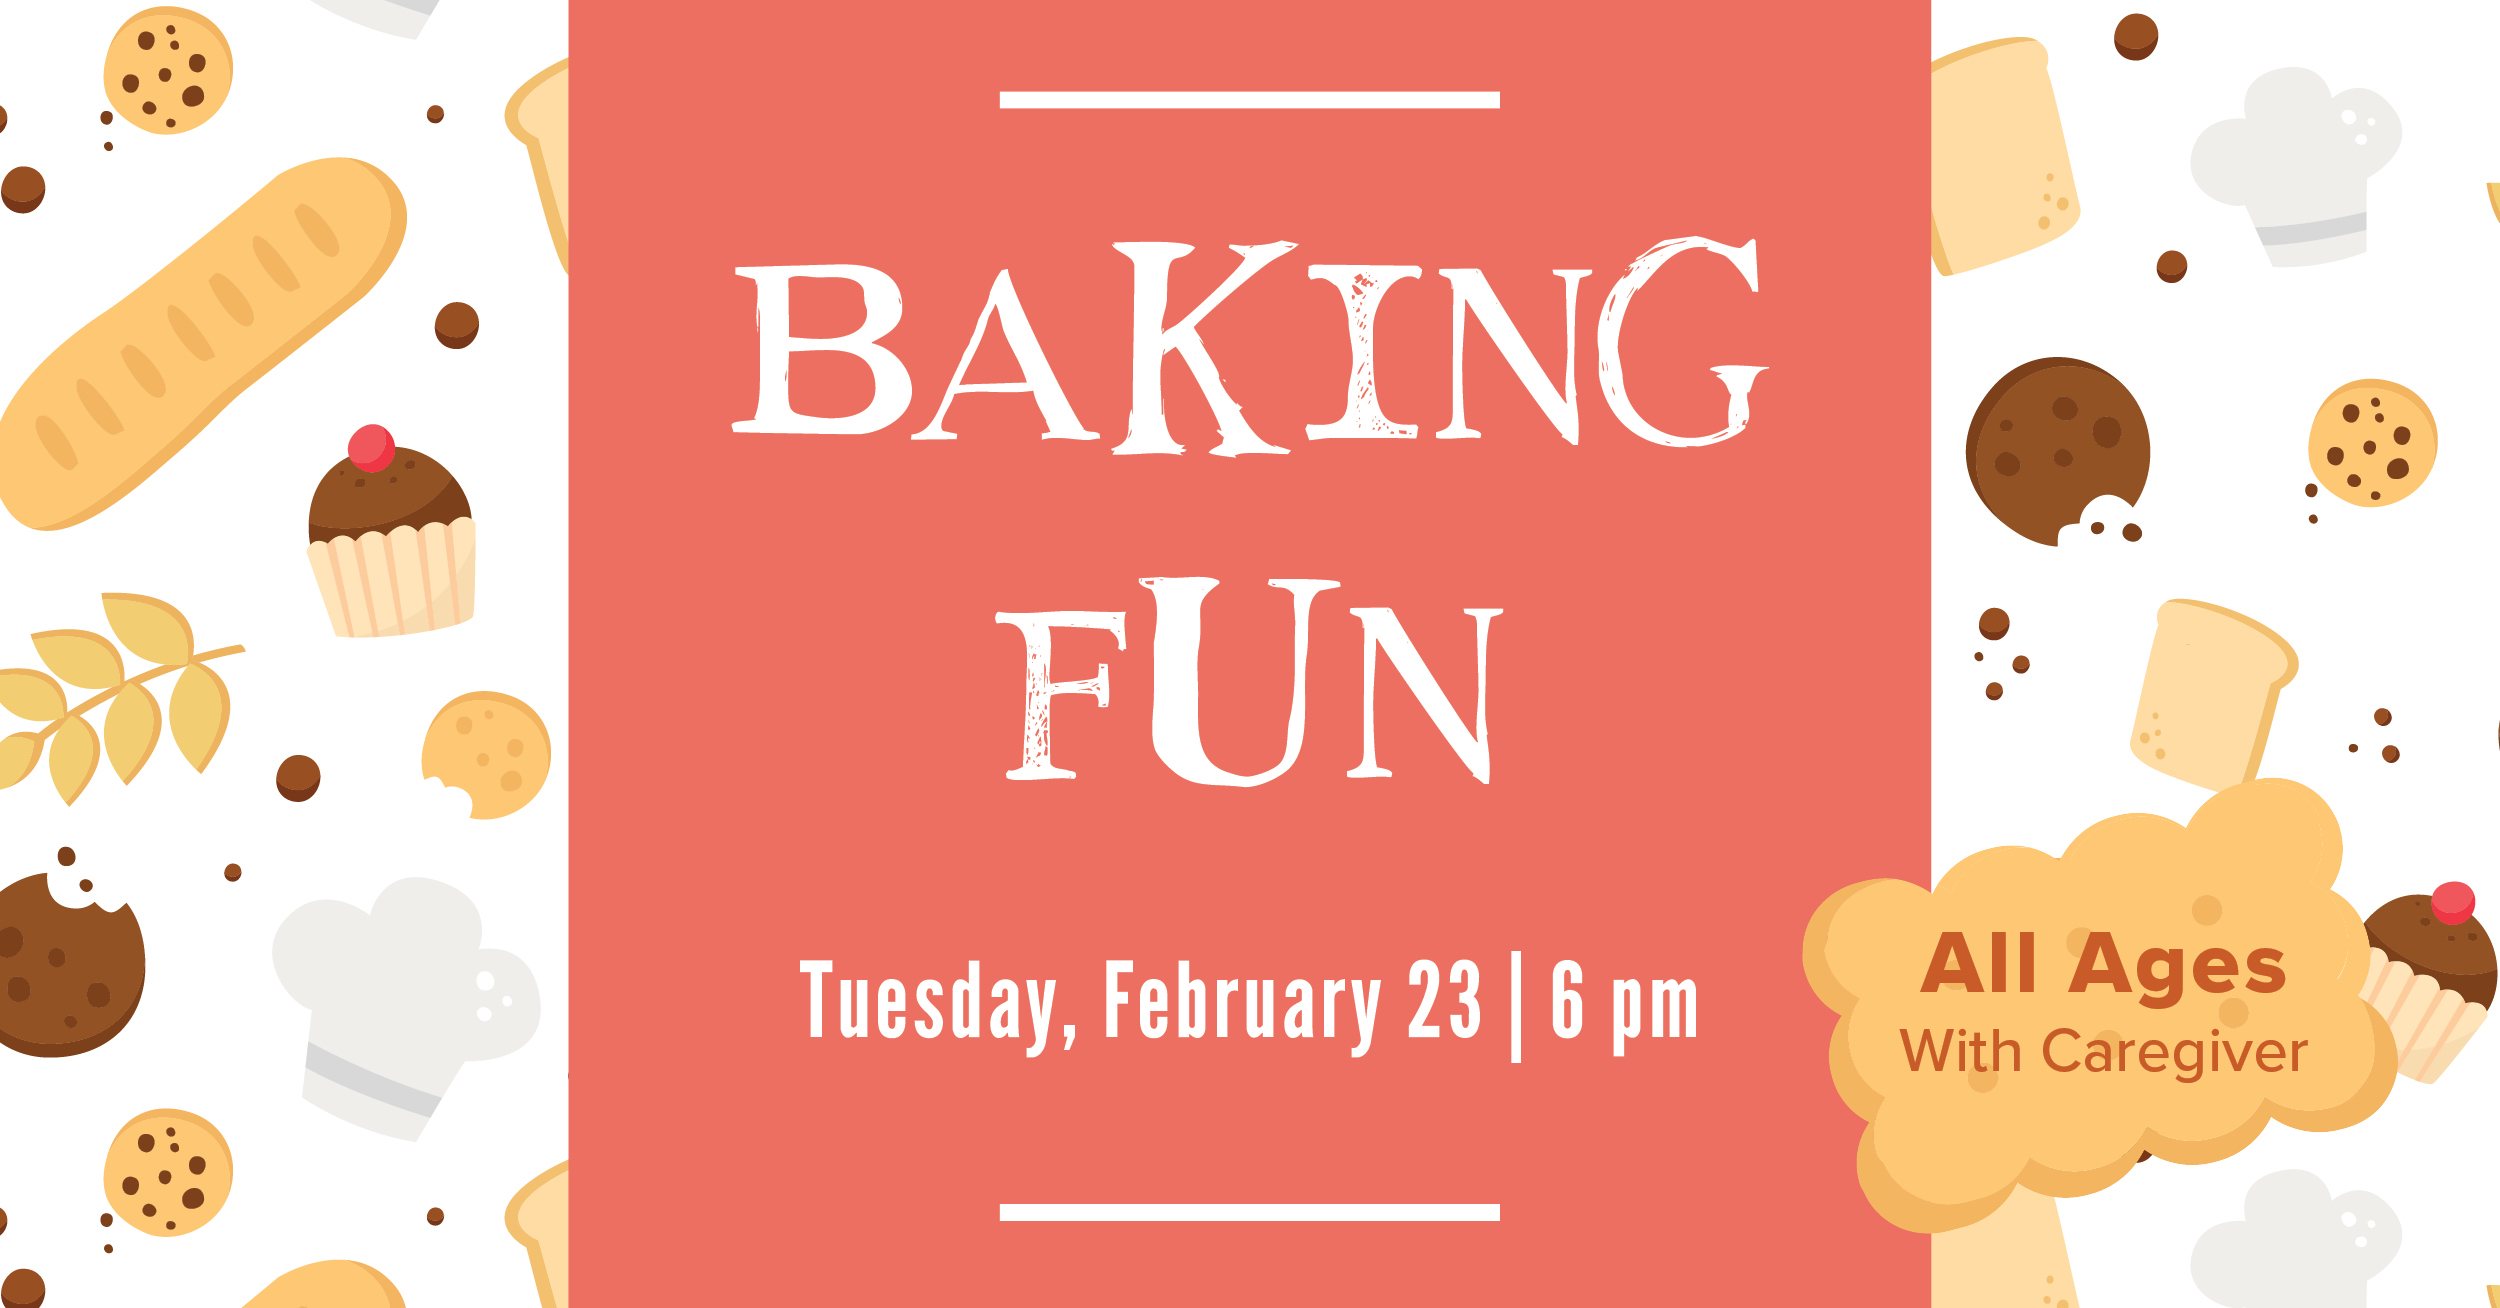 Baking Fun Tuesday, February 23 at 6pm All ages with caregiver